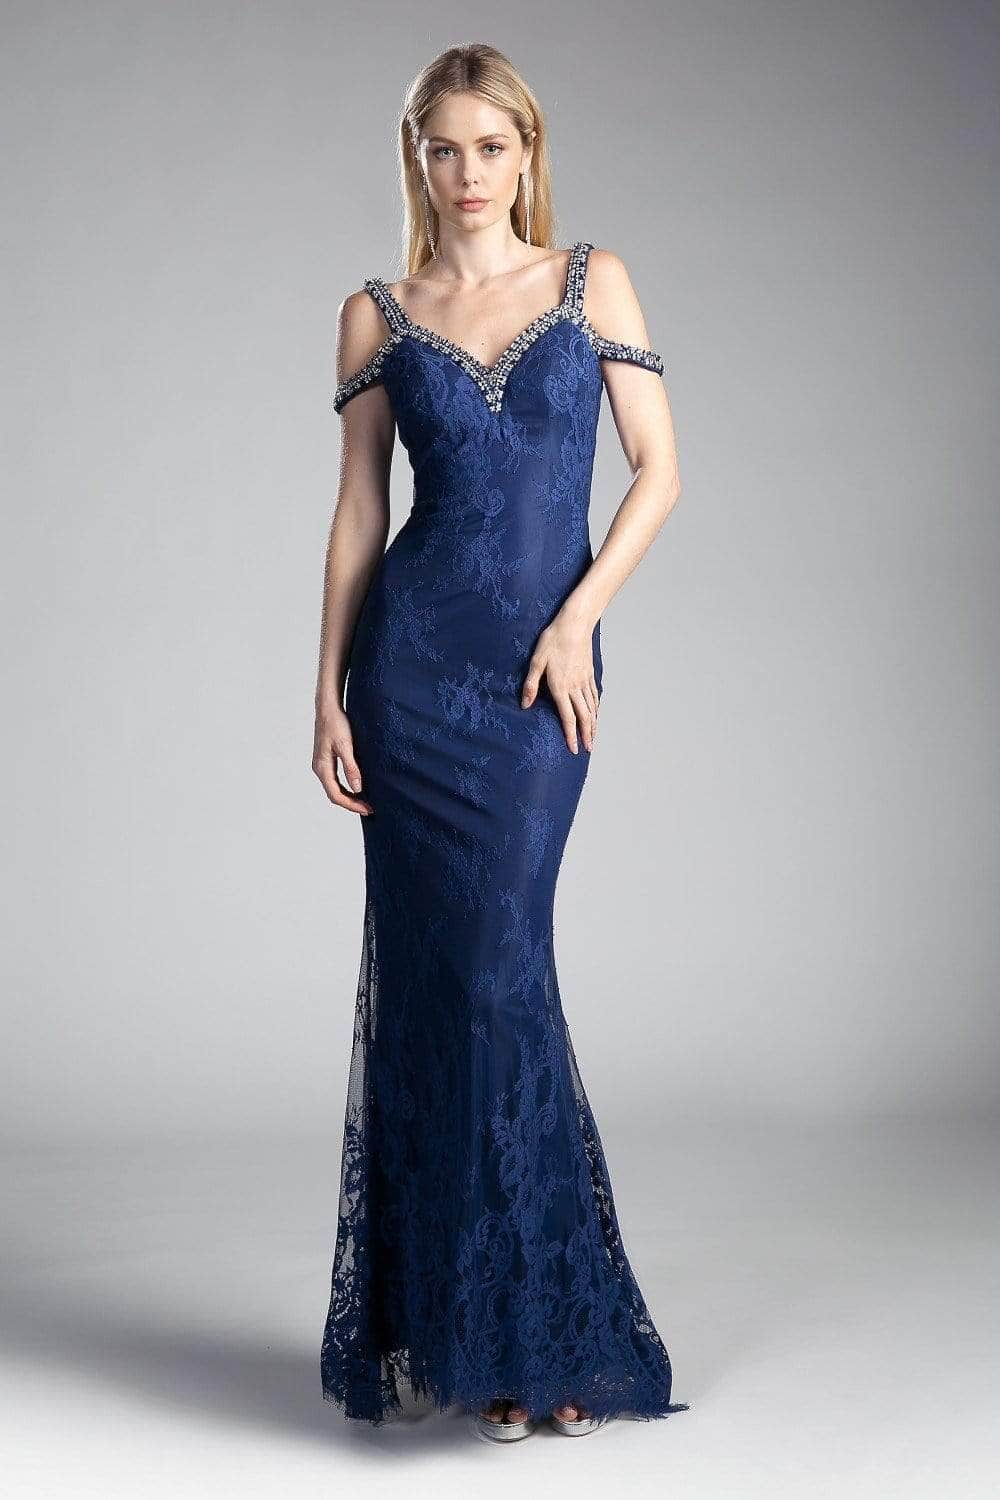 Ladivine 13112A Special Occasion Dress 2 / Navy